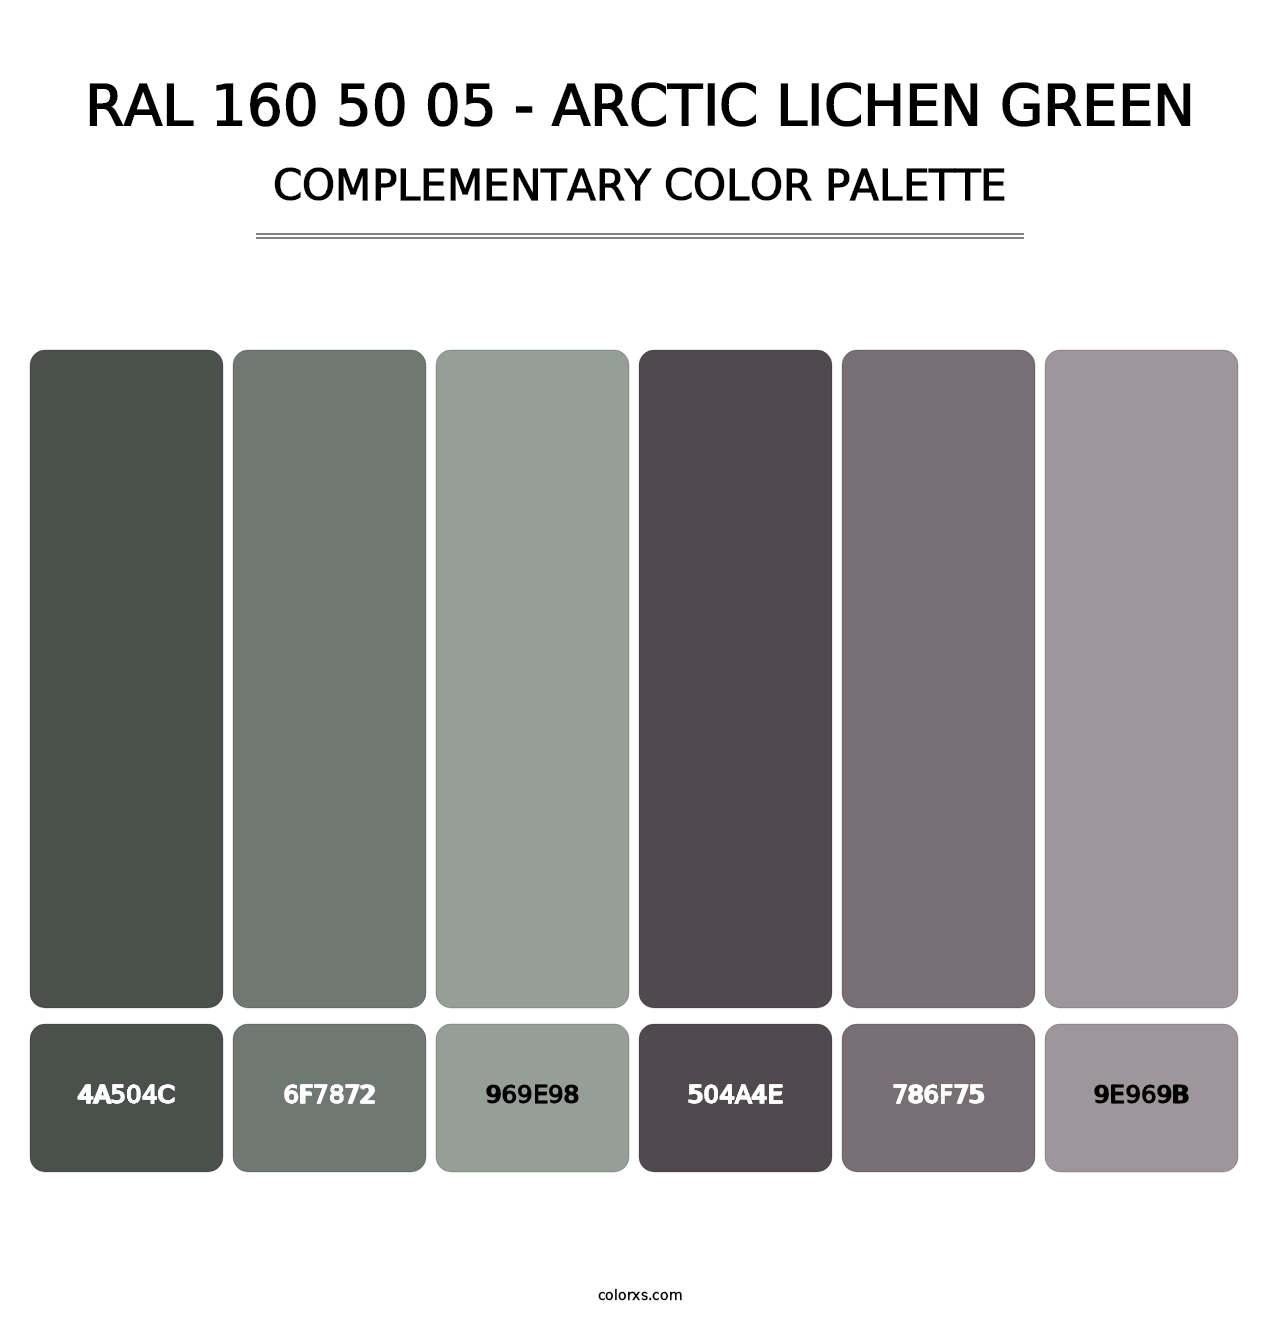 RAL 160 50 05 - Arctic Lichen Green - Complementary Color Palette